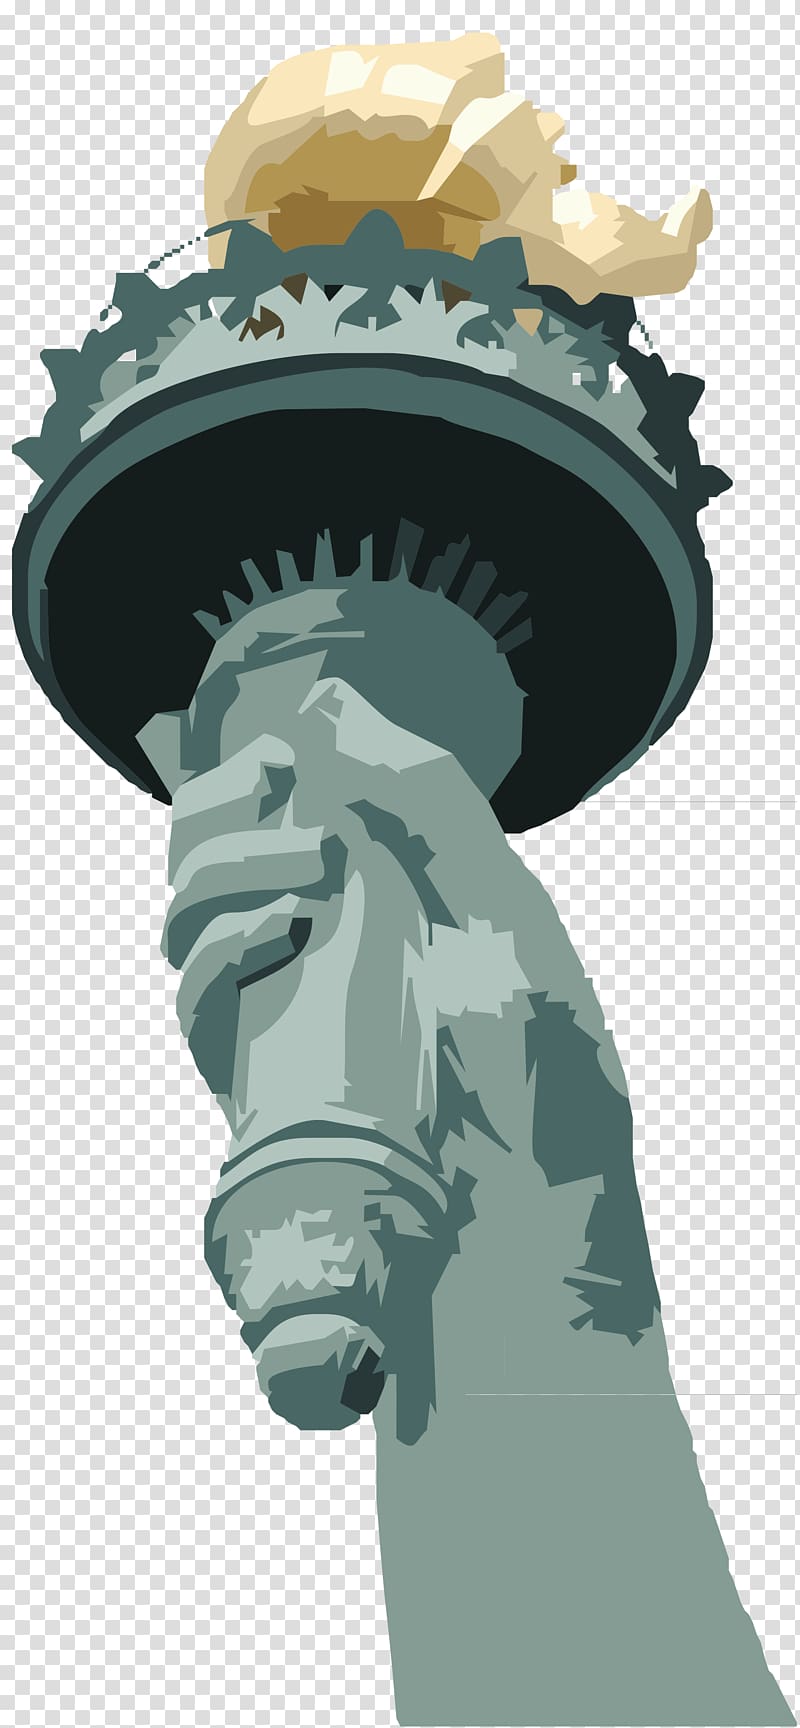 Statue of Liberty Torch, Torch transparent background PNG clipart